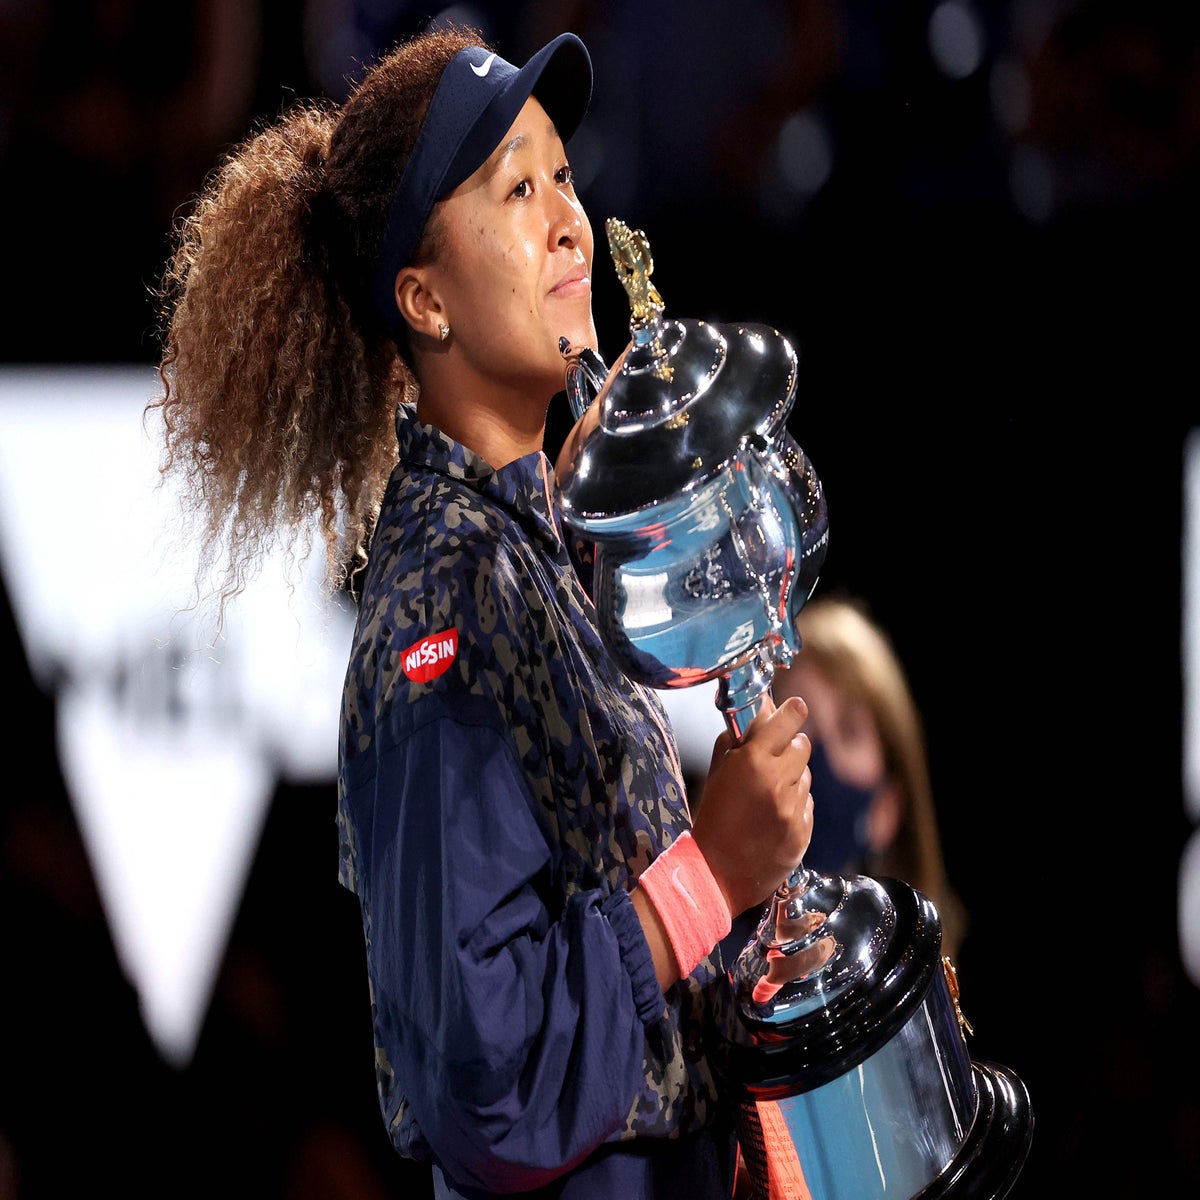 Steppin' on the beach: Osaka and the Australian Open trophy